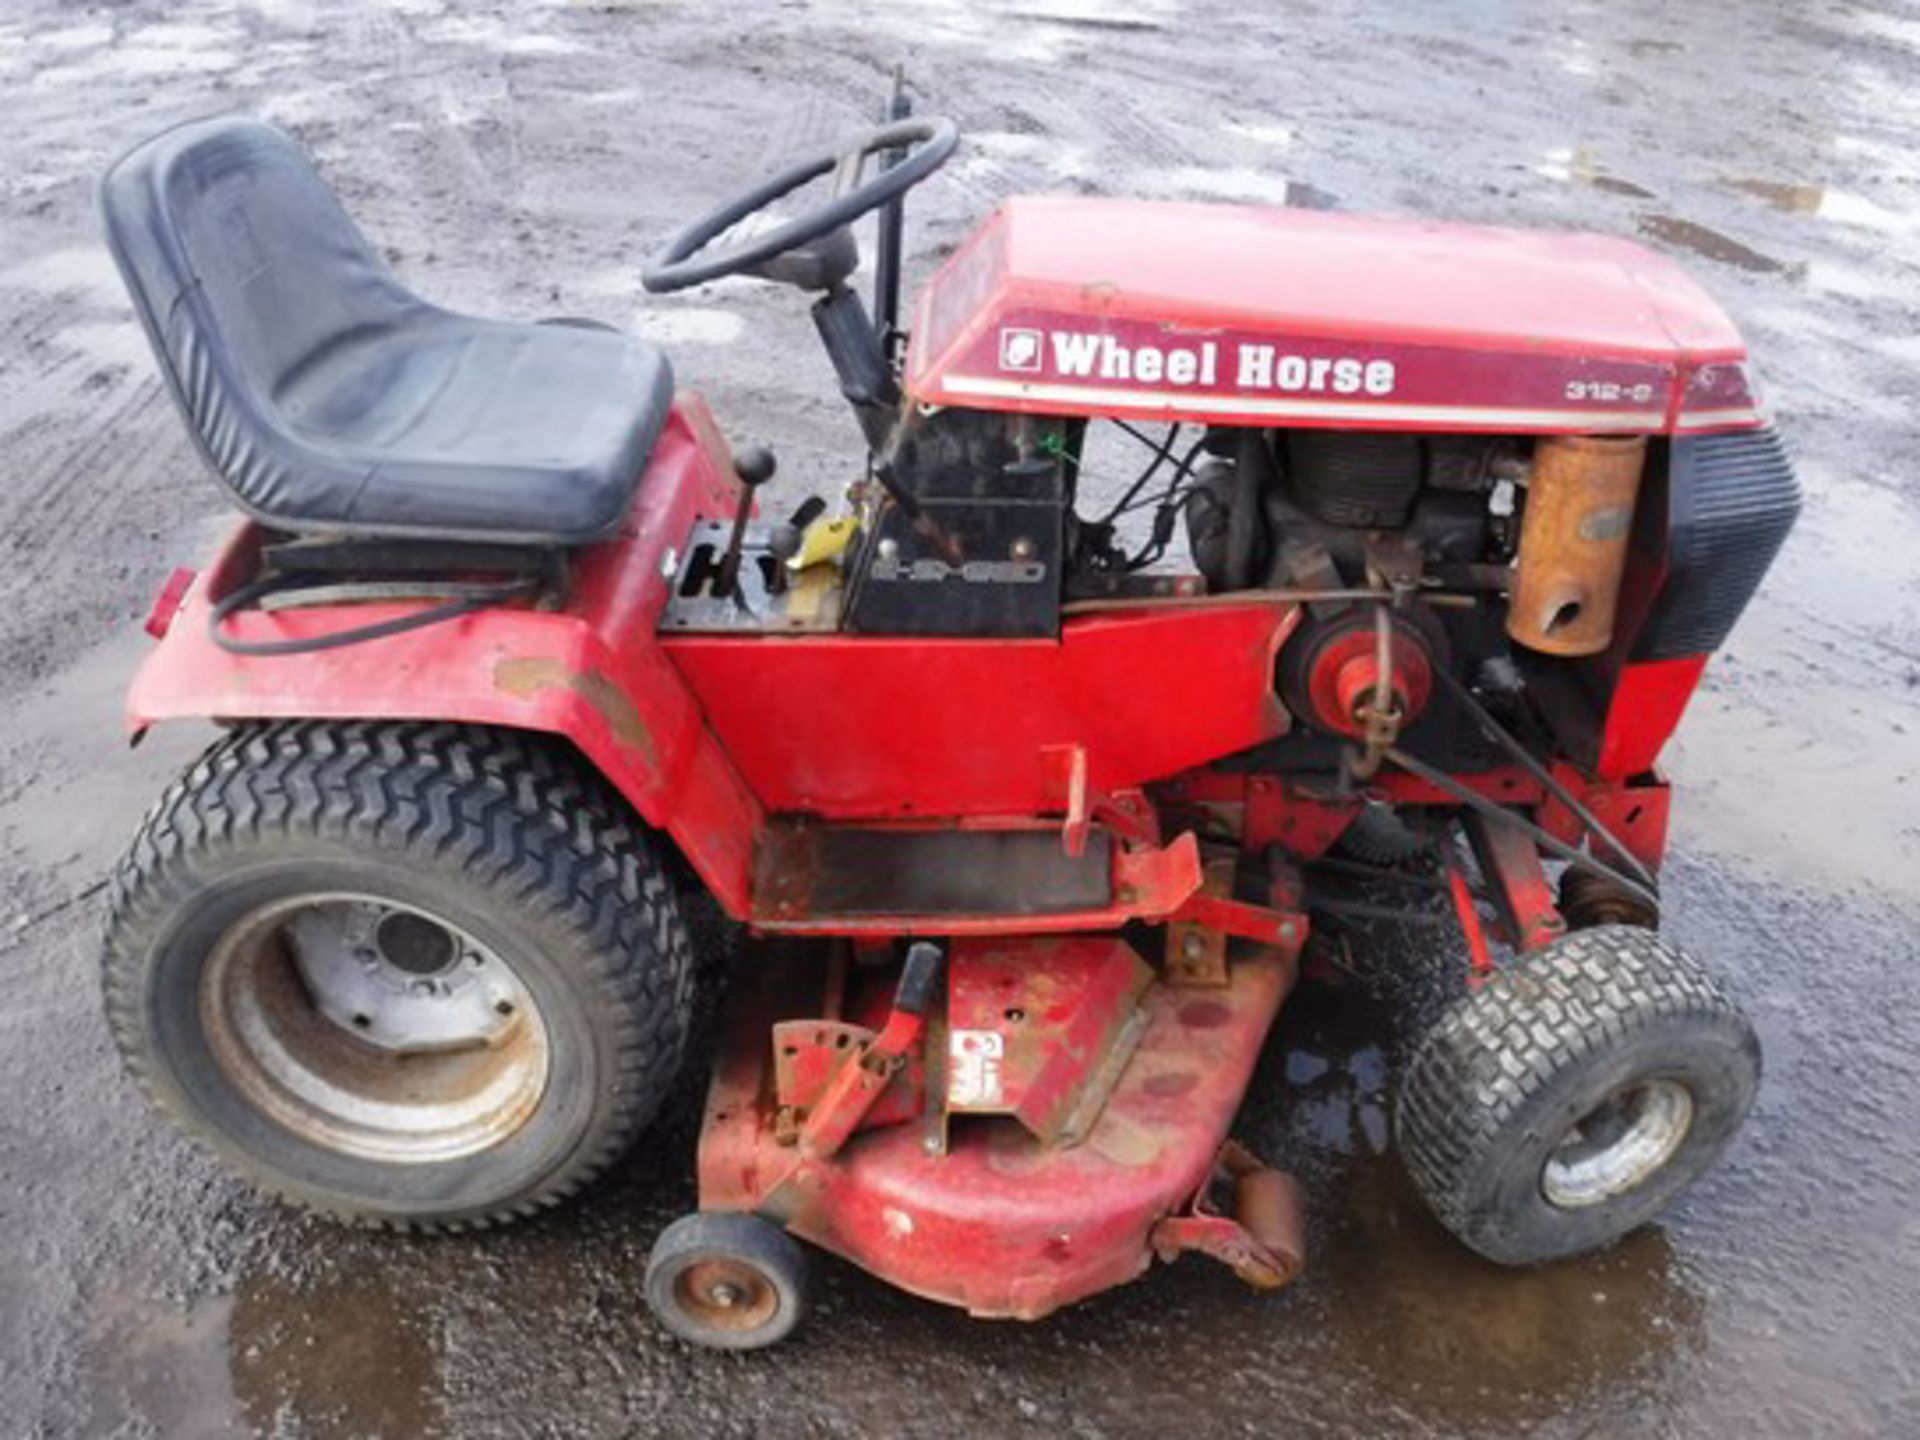 1986 WHEEL HORSE 312.8 LAWN CUTTER, VIN - 21-12K-802-16902, ENGINE NO - 1600649564, 1389HRS (NOT VER - Image 6 of 11